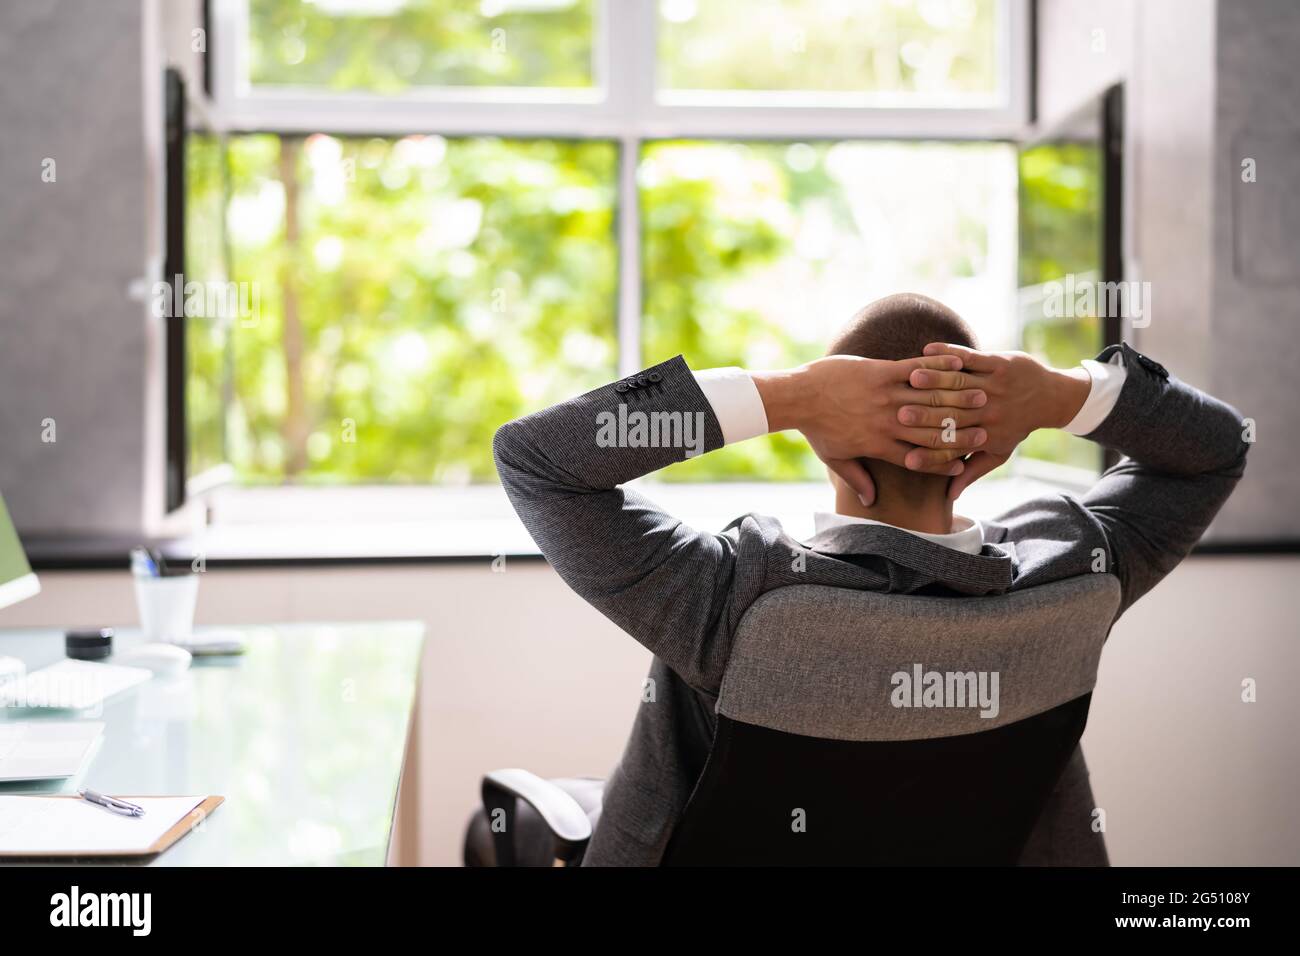 Open Office Window. Breathing Fresh Air And Relaxing Stock Photo